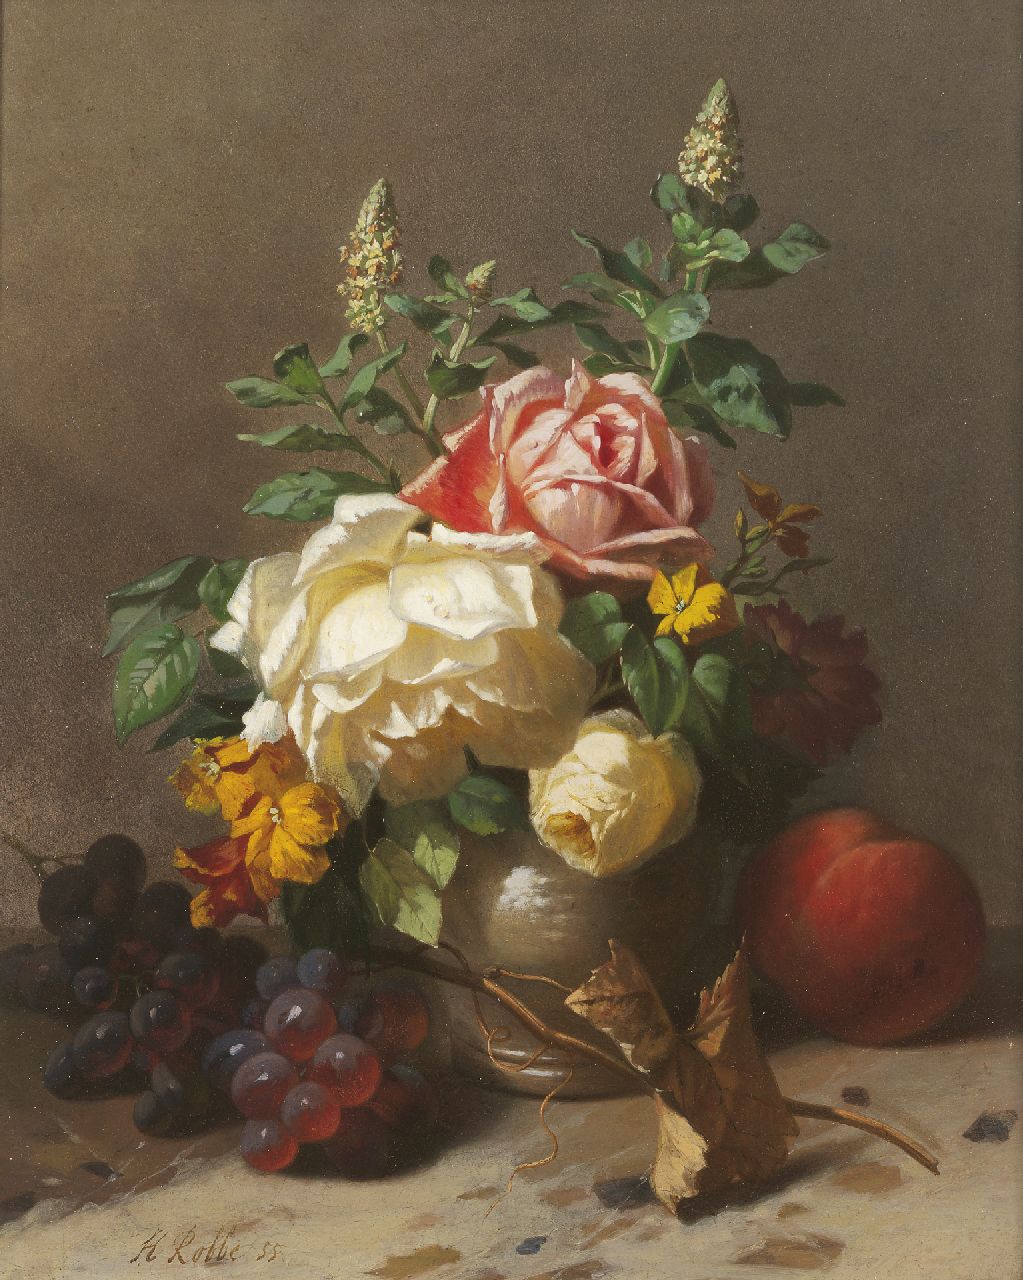 Robbe H.A.  | Henri Alexander Robbe, A flower still life with grapes and a peach, Öl auf Holz 40,6 x 32,7 cm, signed l.l. und painted '55